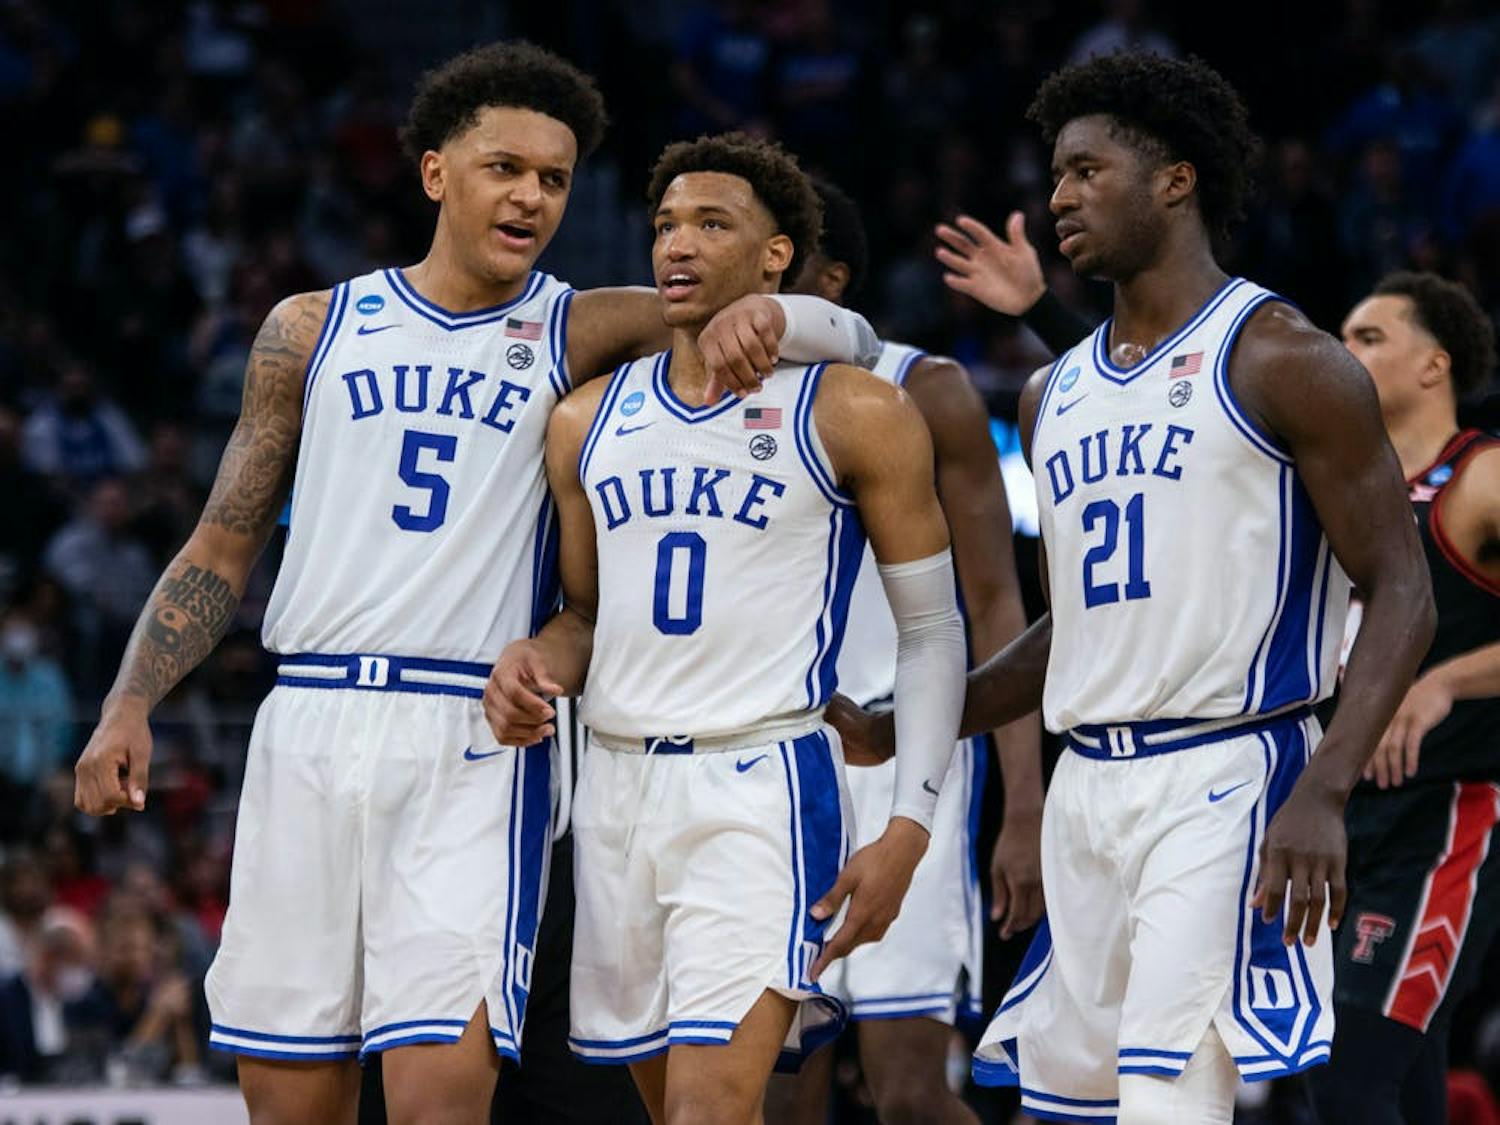 Duke has five players ready to enter the professional ranks in Thursday's draft.